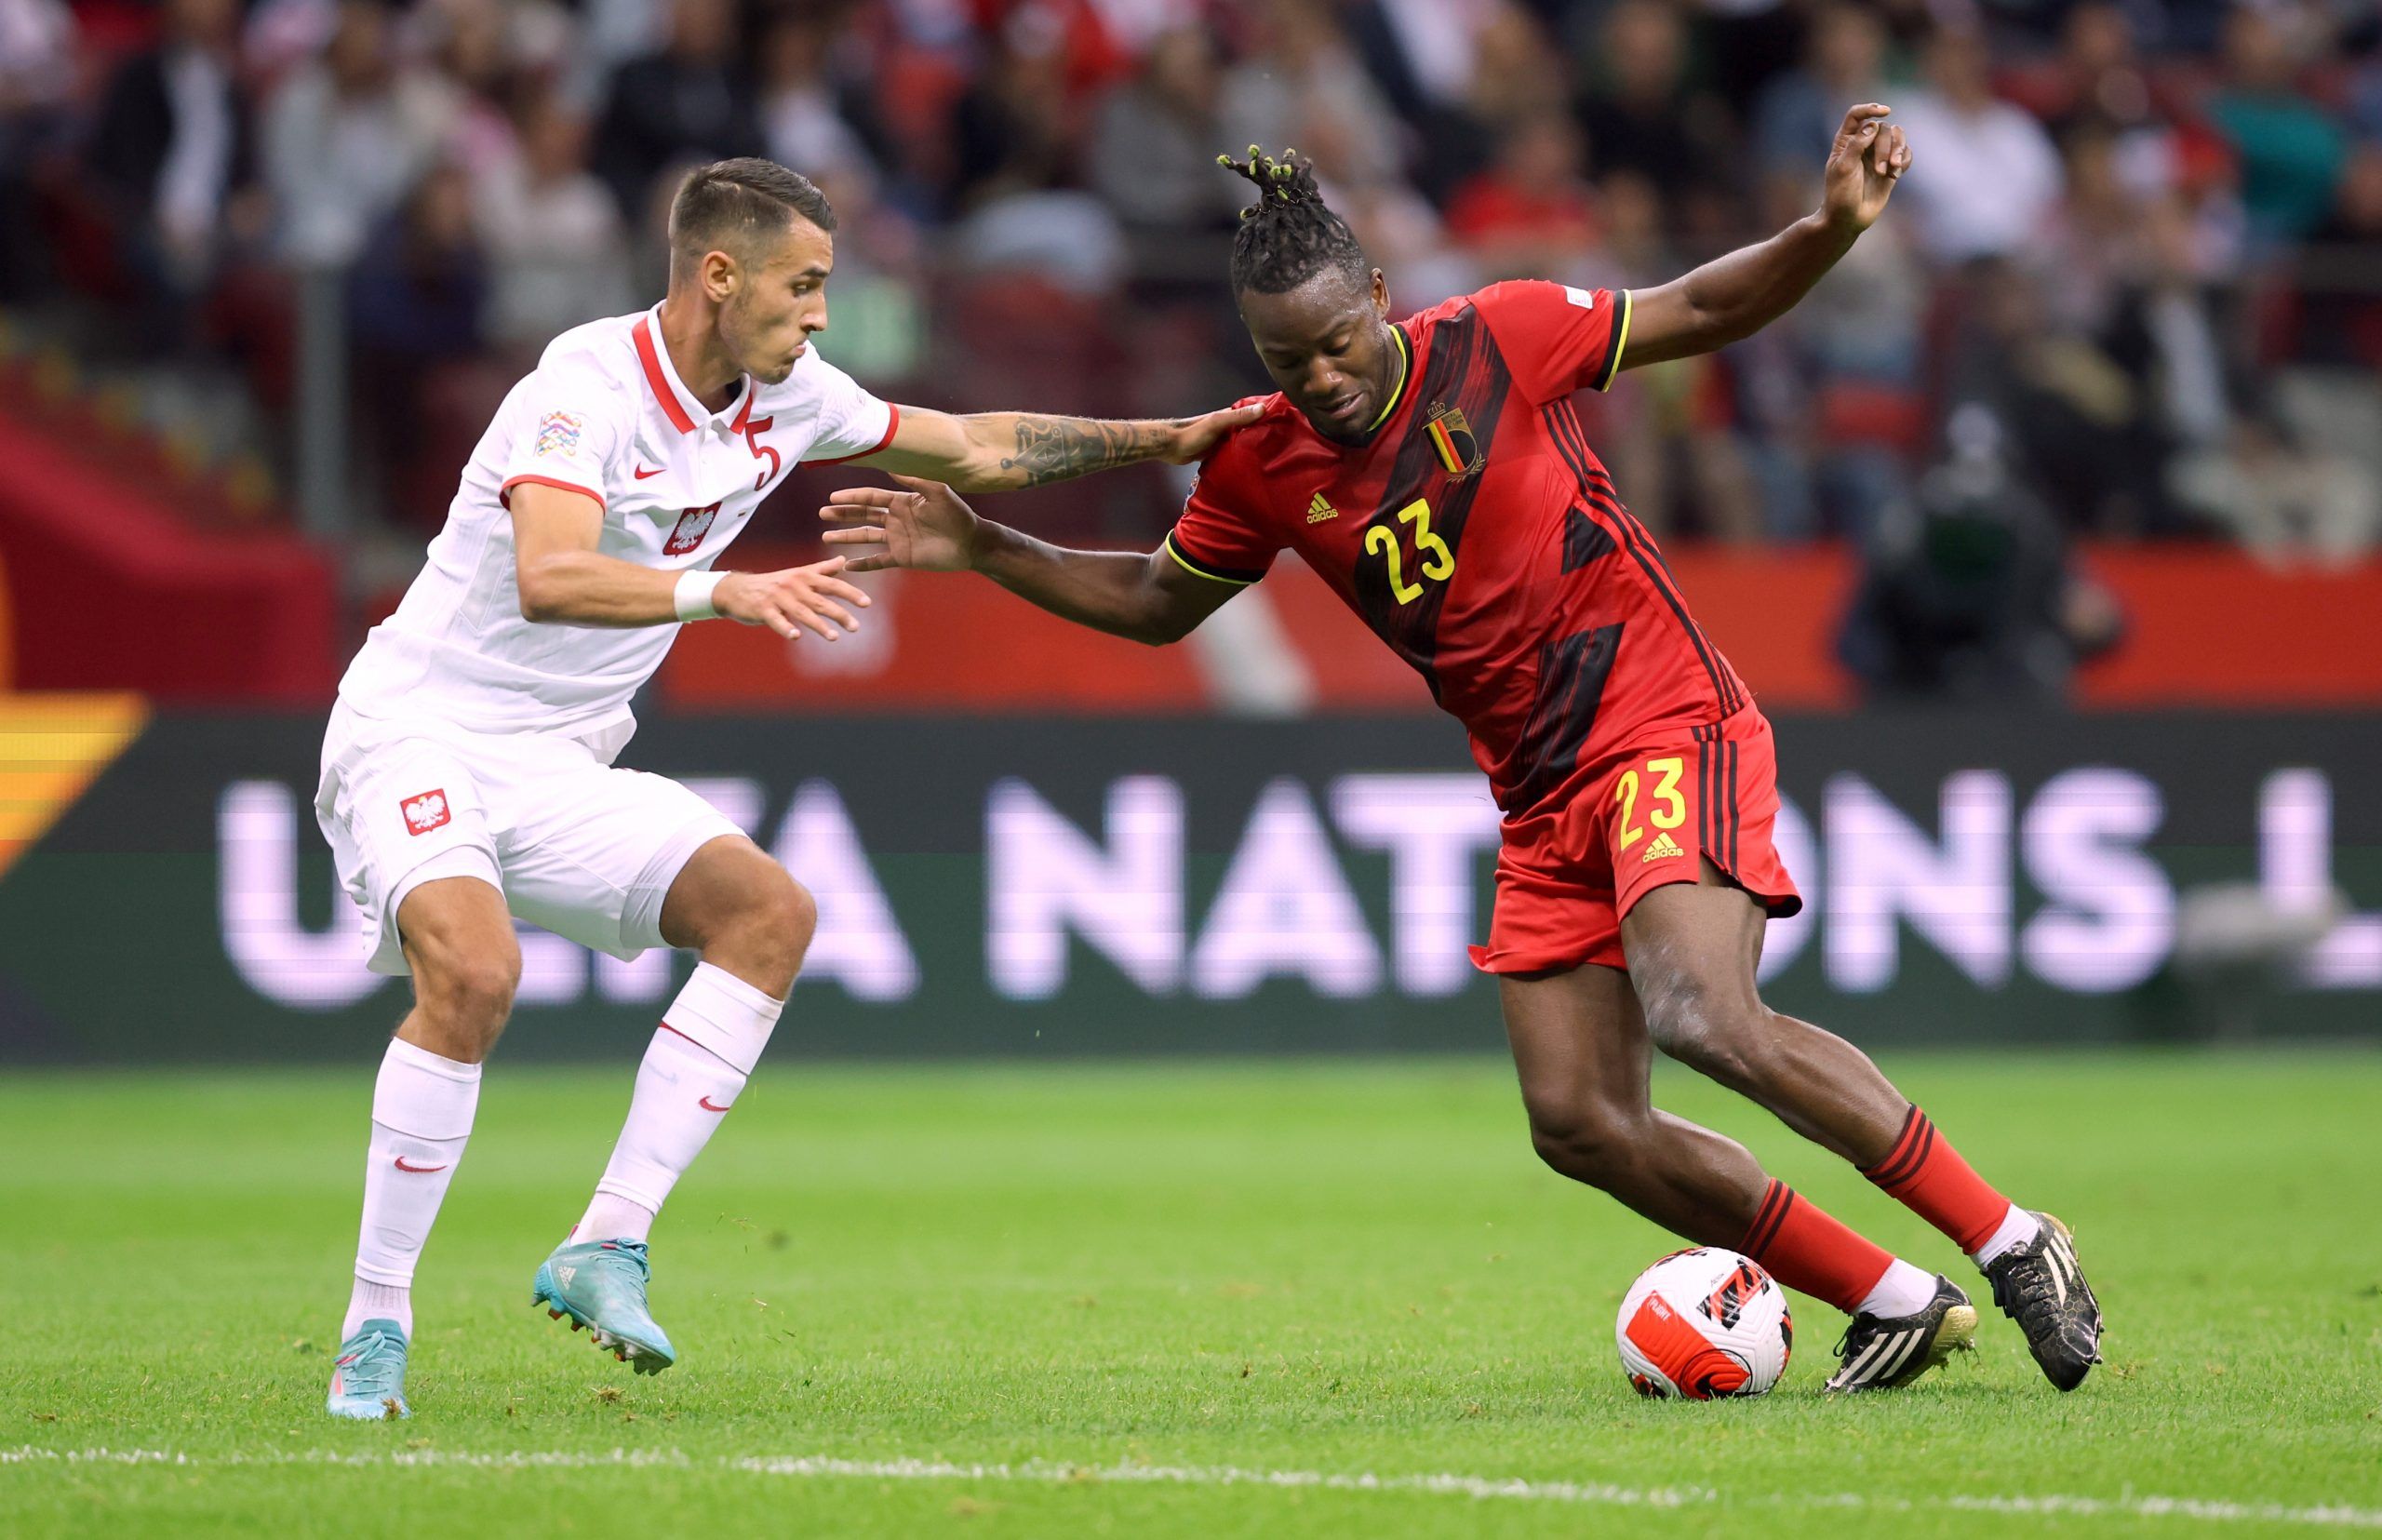 Newcastle United: Magpies could sign Michy Batshuayi -Newcastle United News